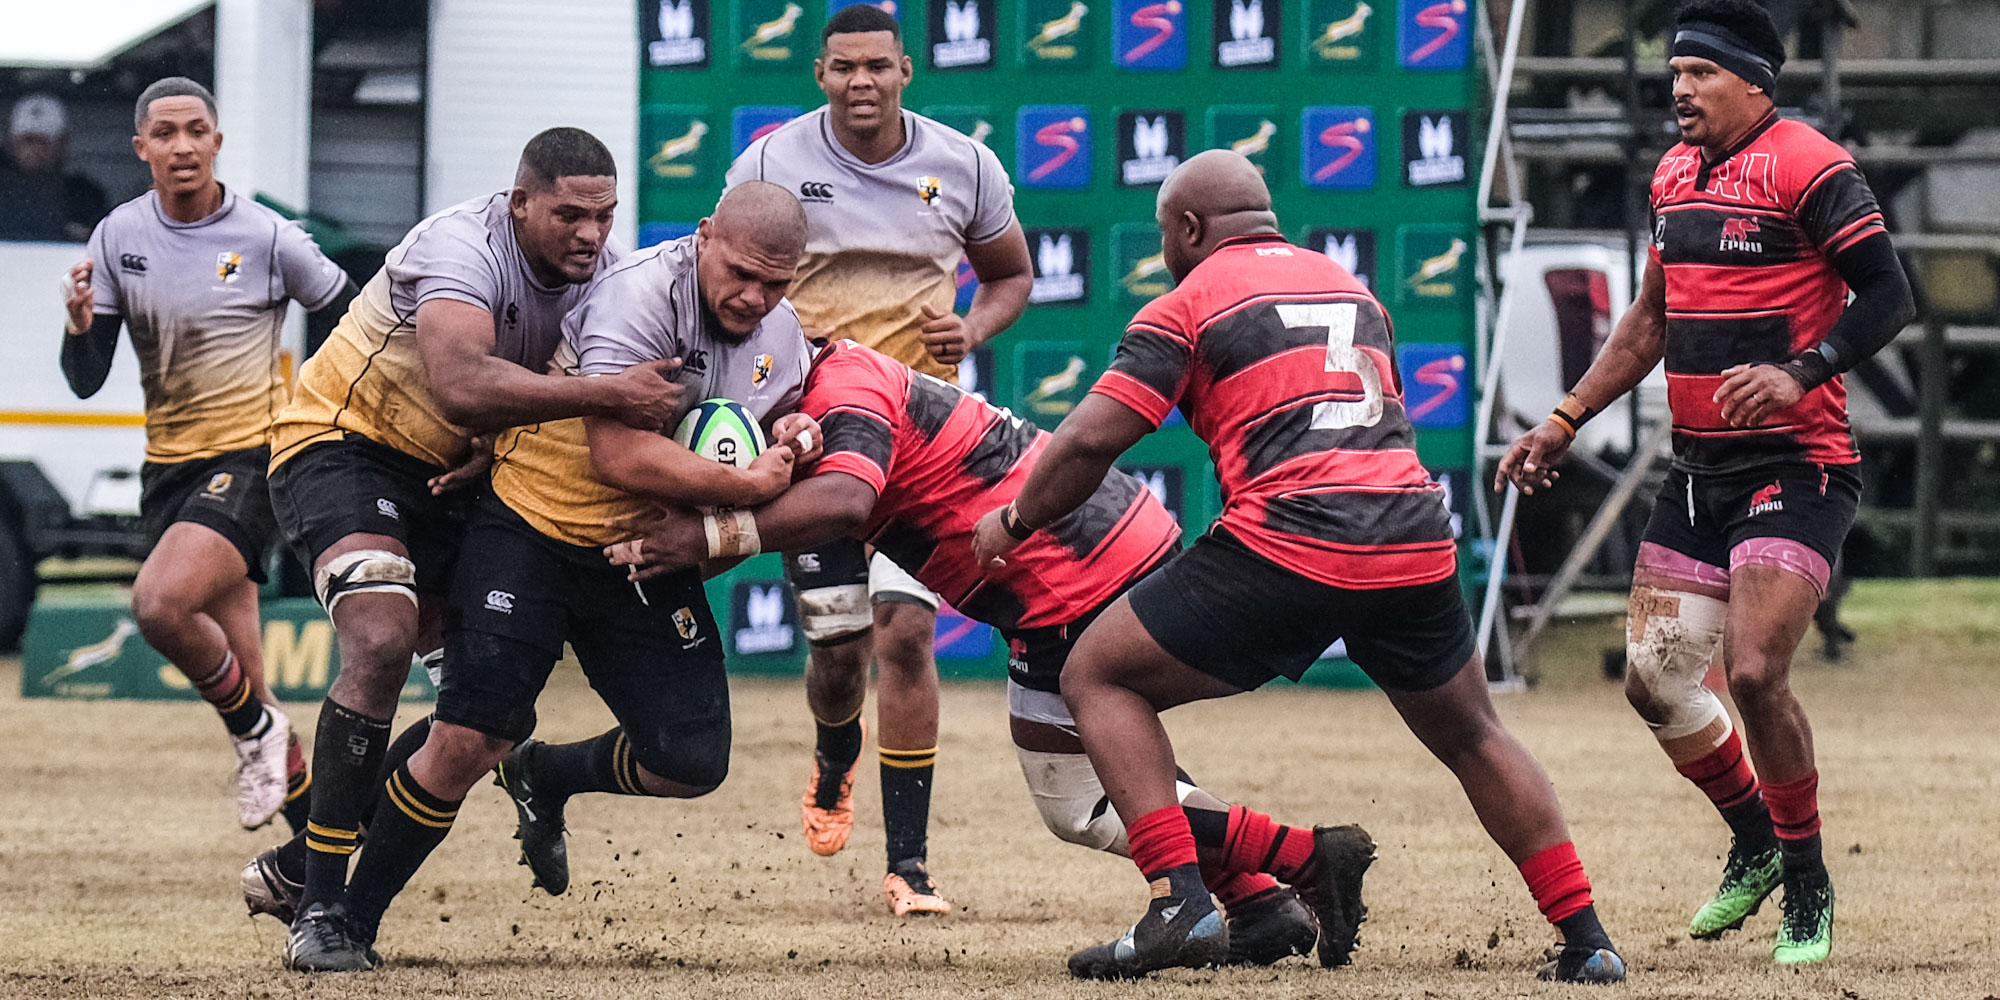 Wayrin Losper of the Boland Kavaliers on the charge in an earlier game against Eastern Province.